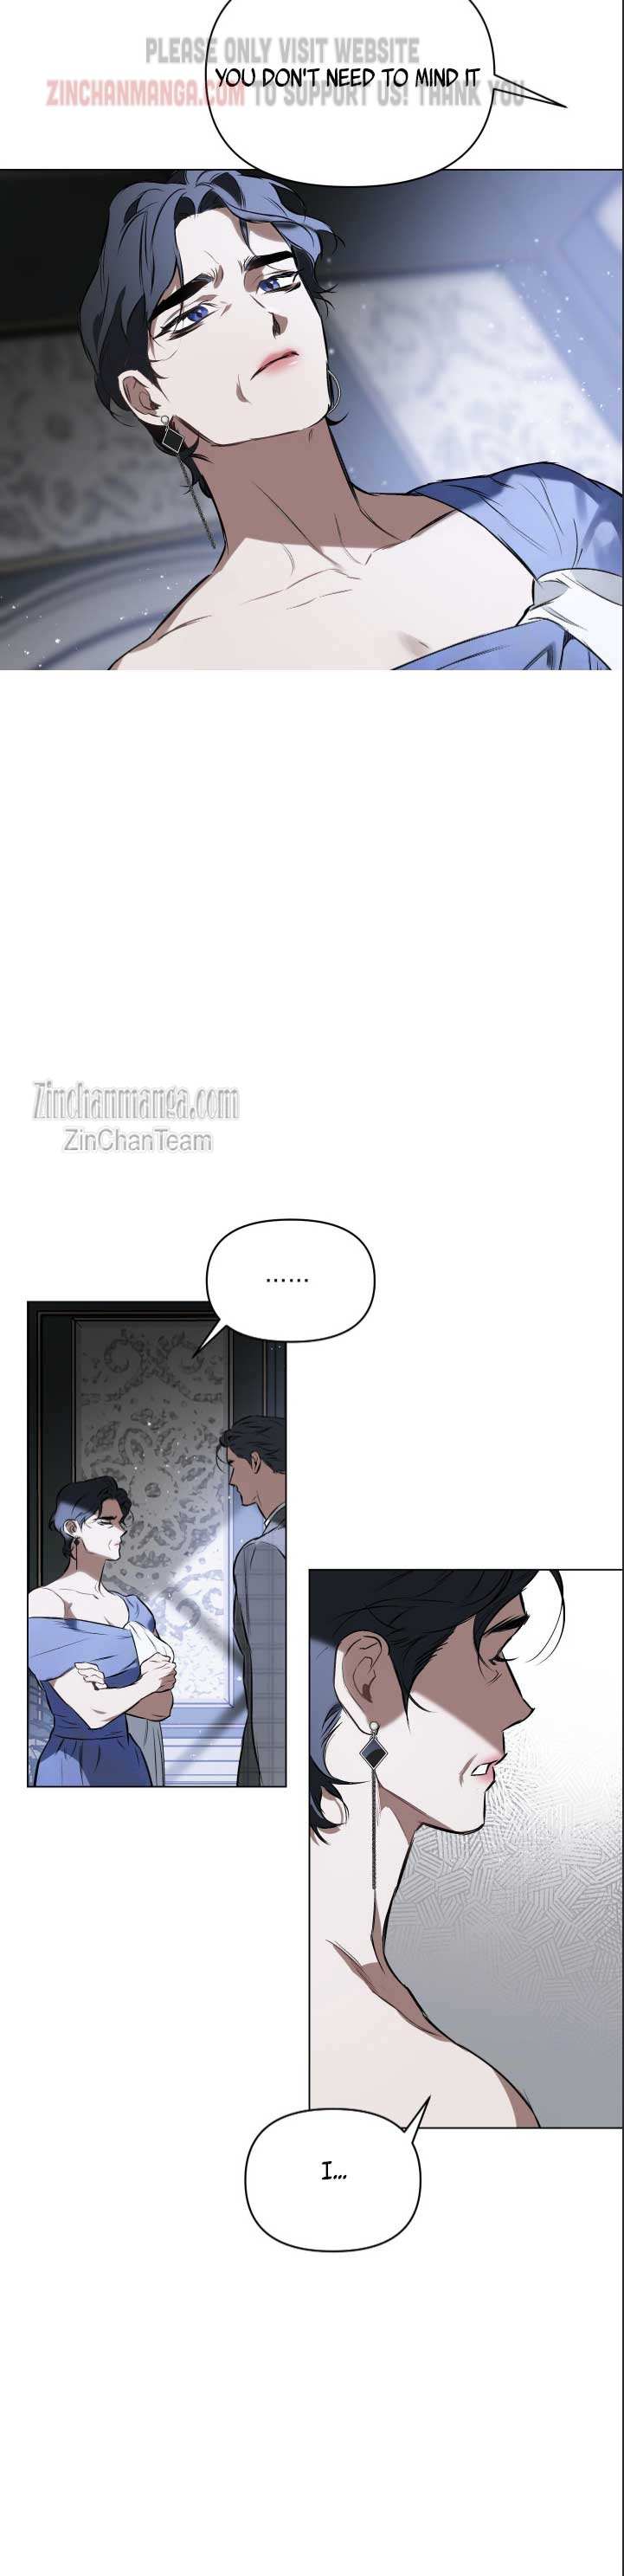 Define The Relationship (Yaoi) - Page 3